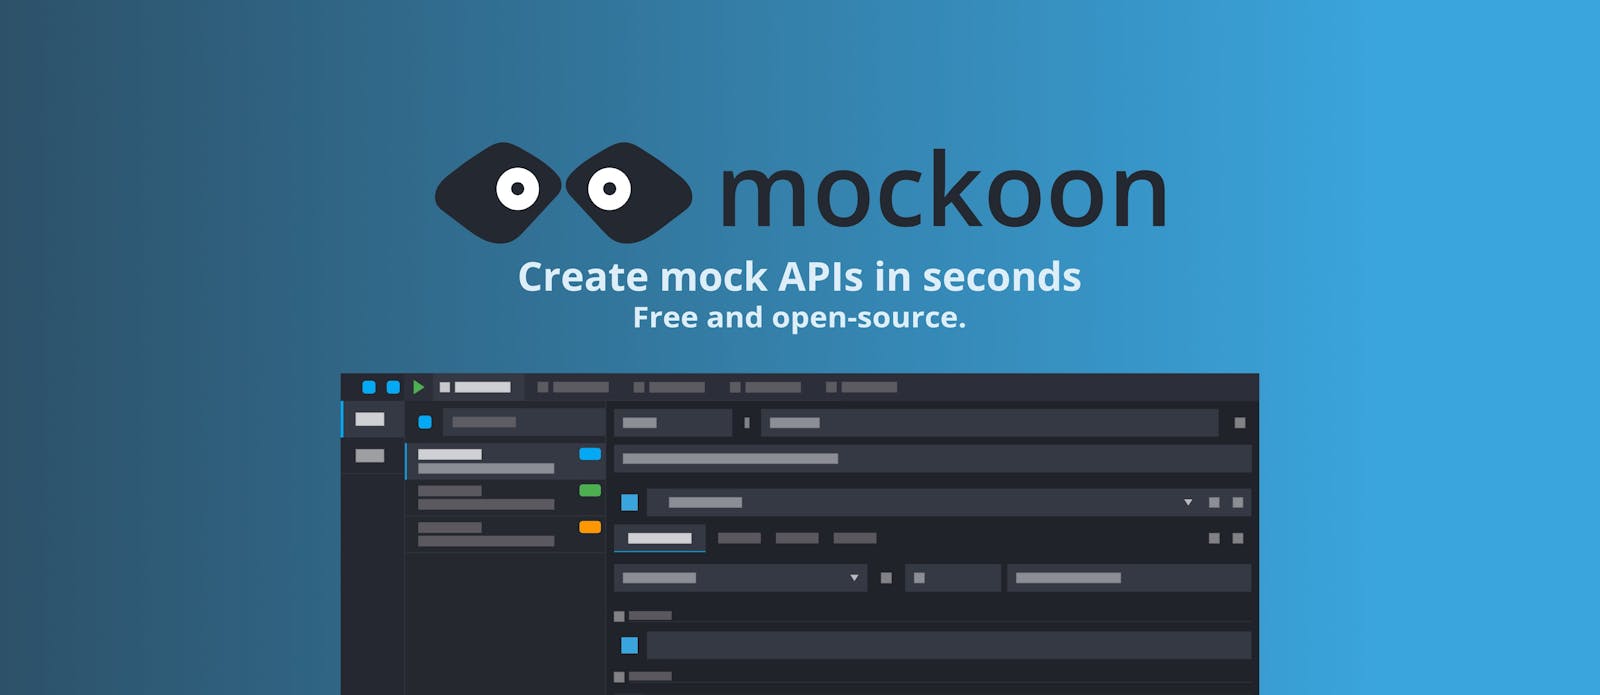 My first leap into OpenSource: Contributing to Mockoon